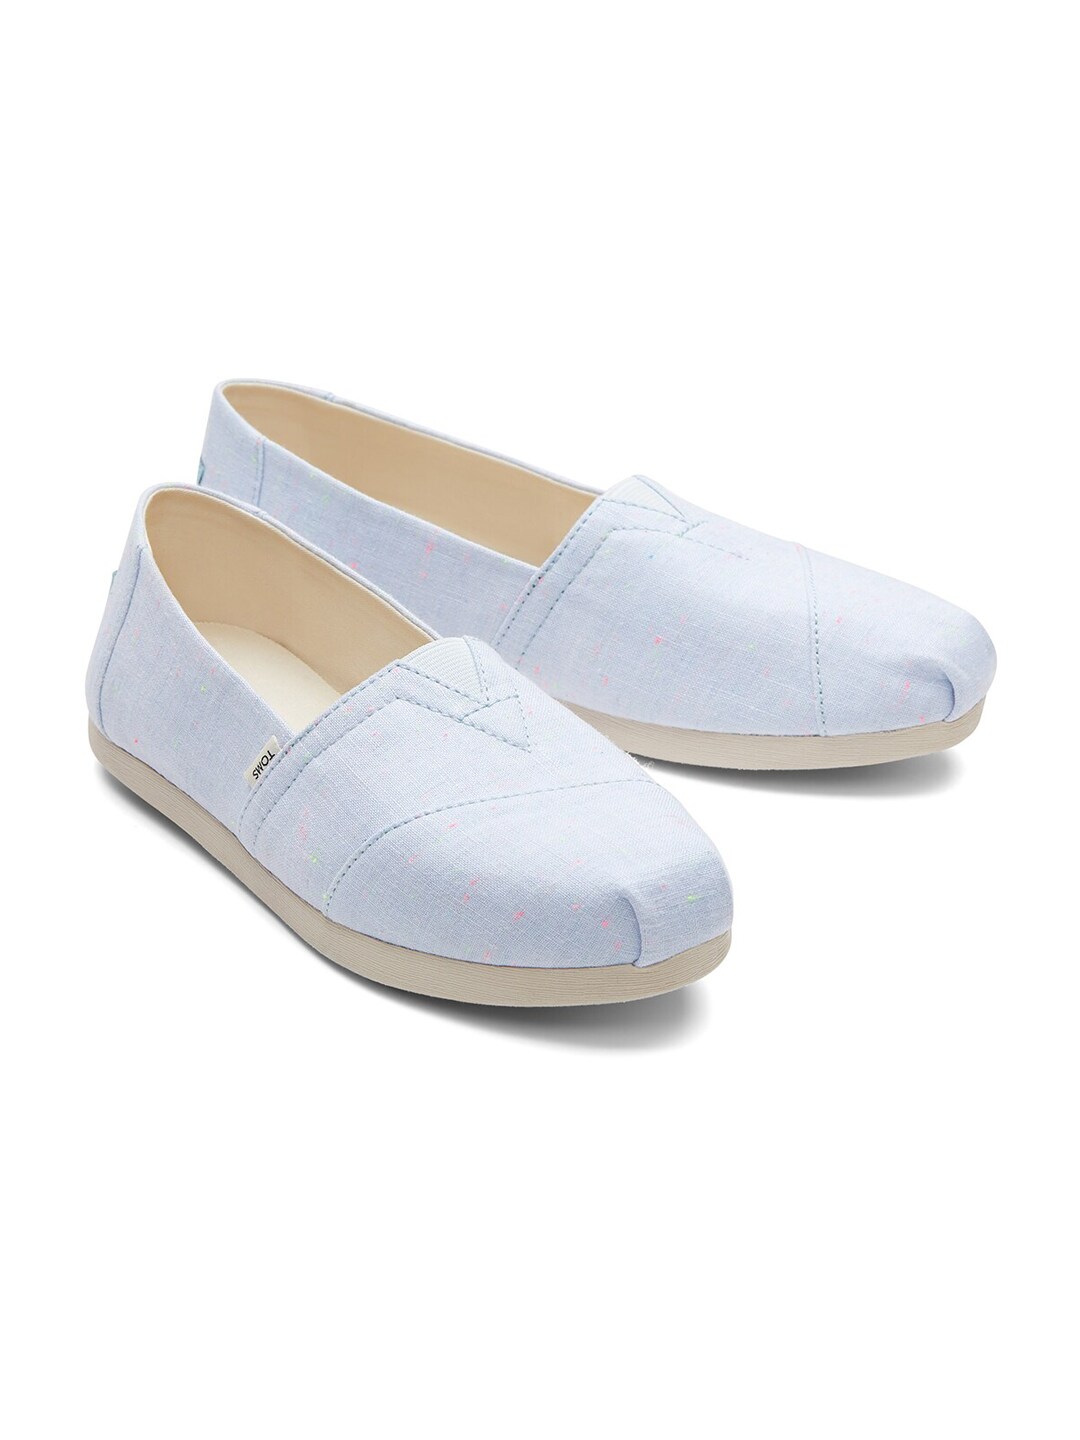 TOMS Women Blue Alpargata Speckled Linen Slip-on Sneakers Price in India